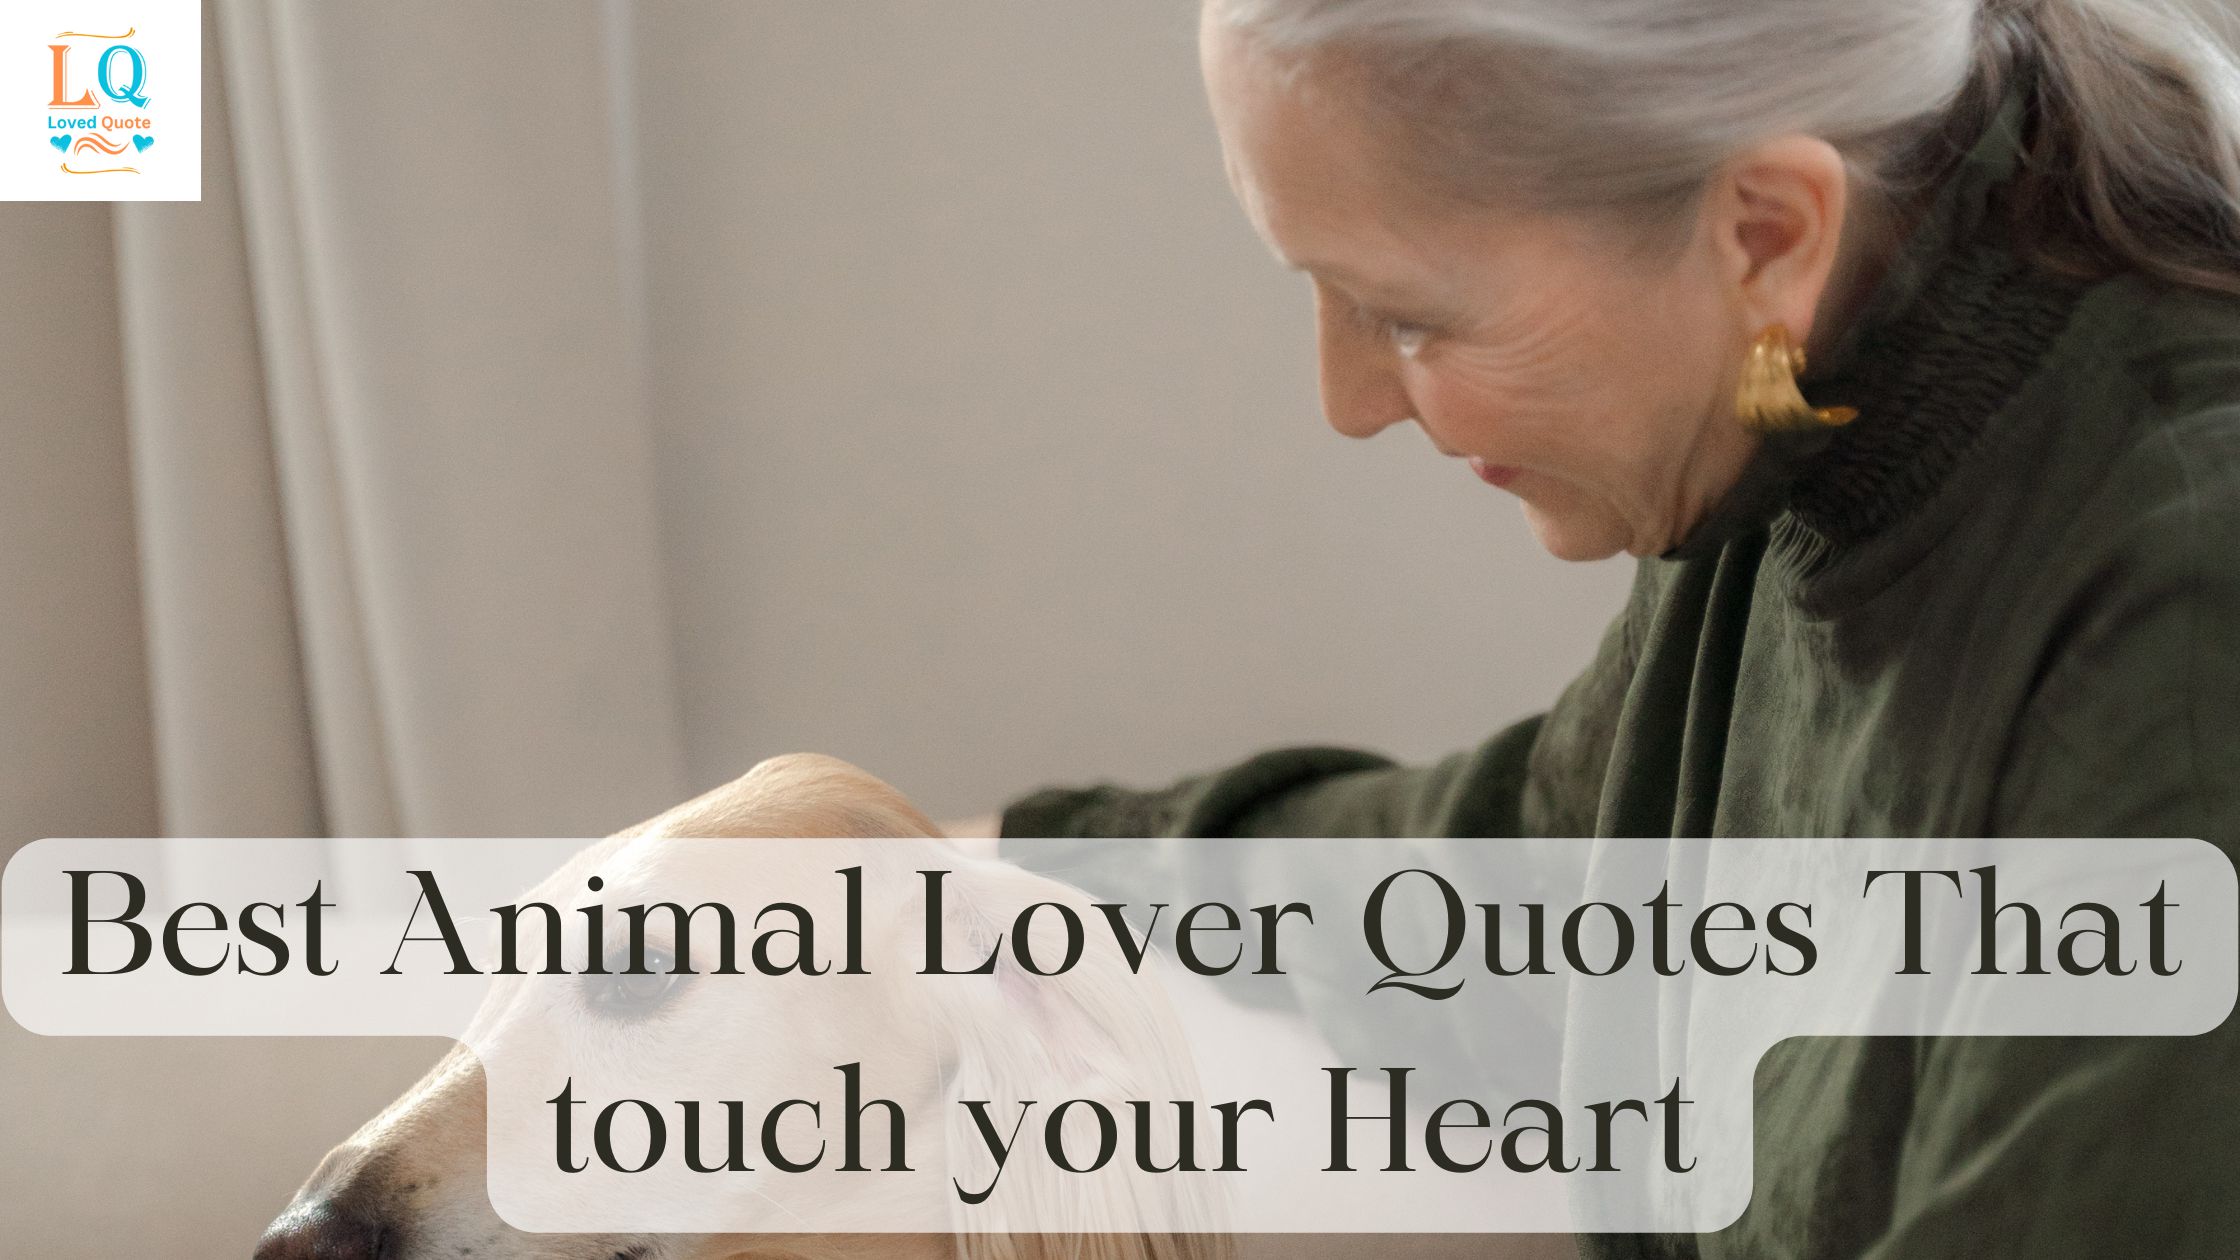 Best Animal Lover Quotes That touch your Heart